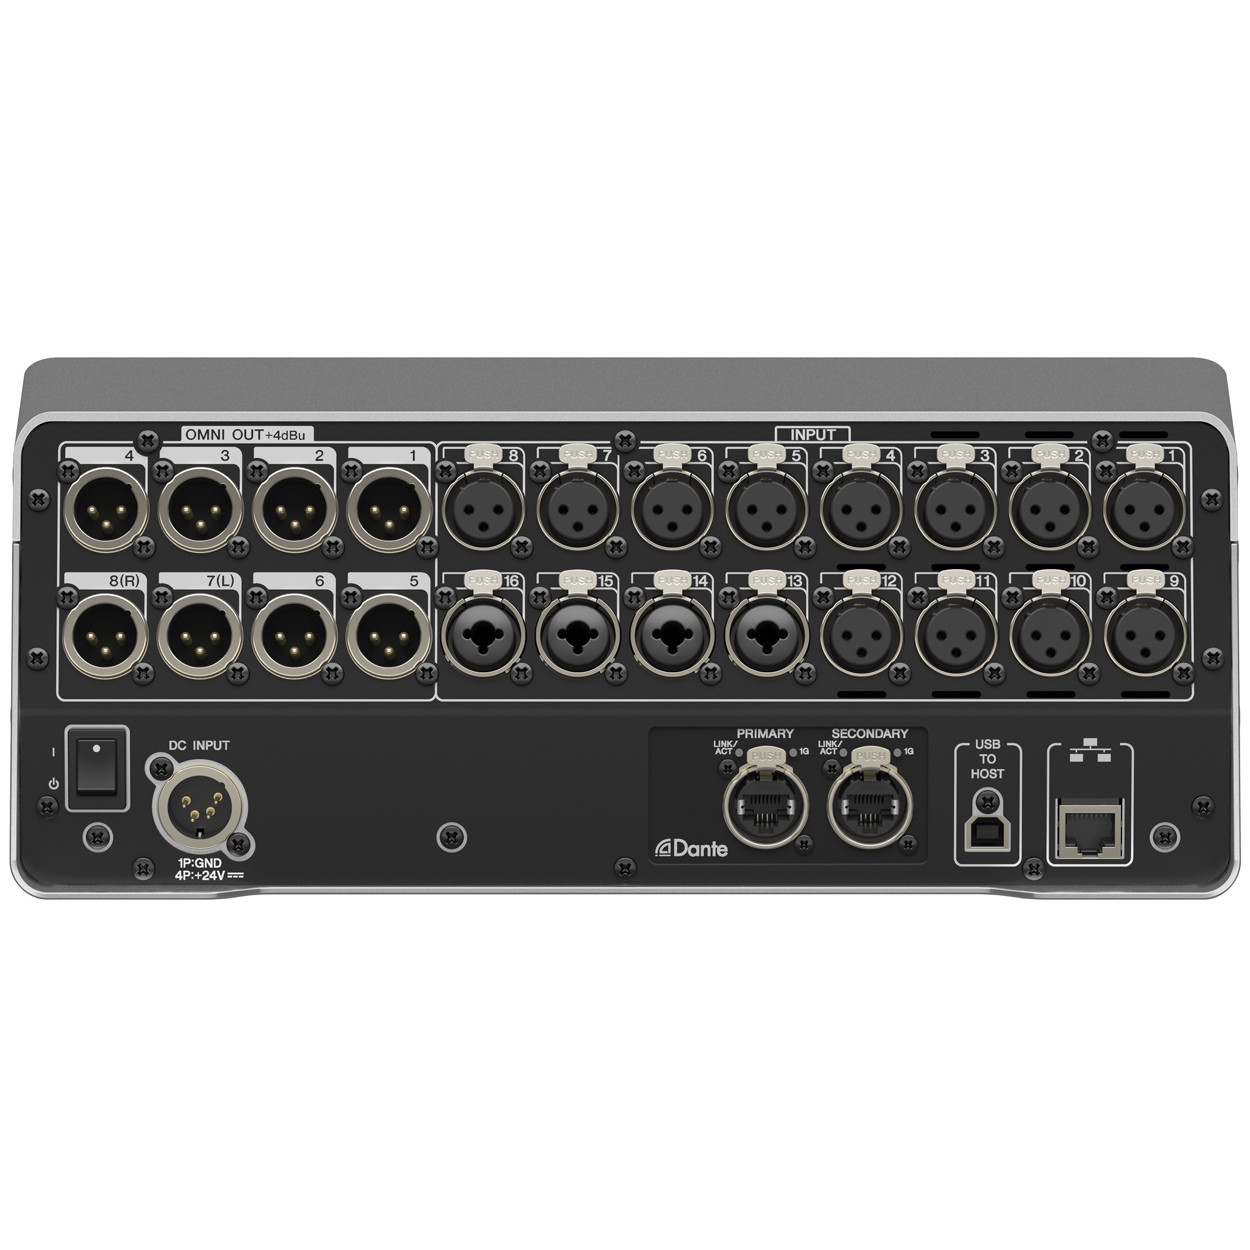 Back of Yamaha DM3-D 22-Channel Ultra Compact Digital Mixer with Dante